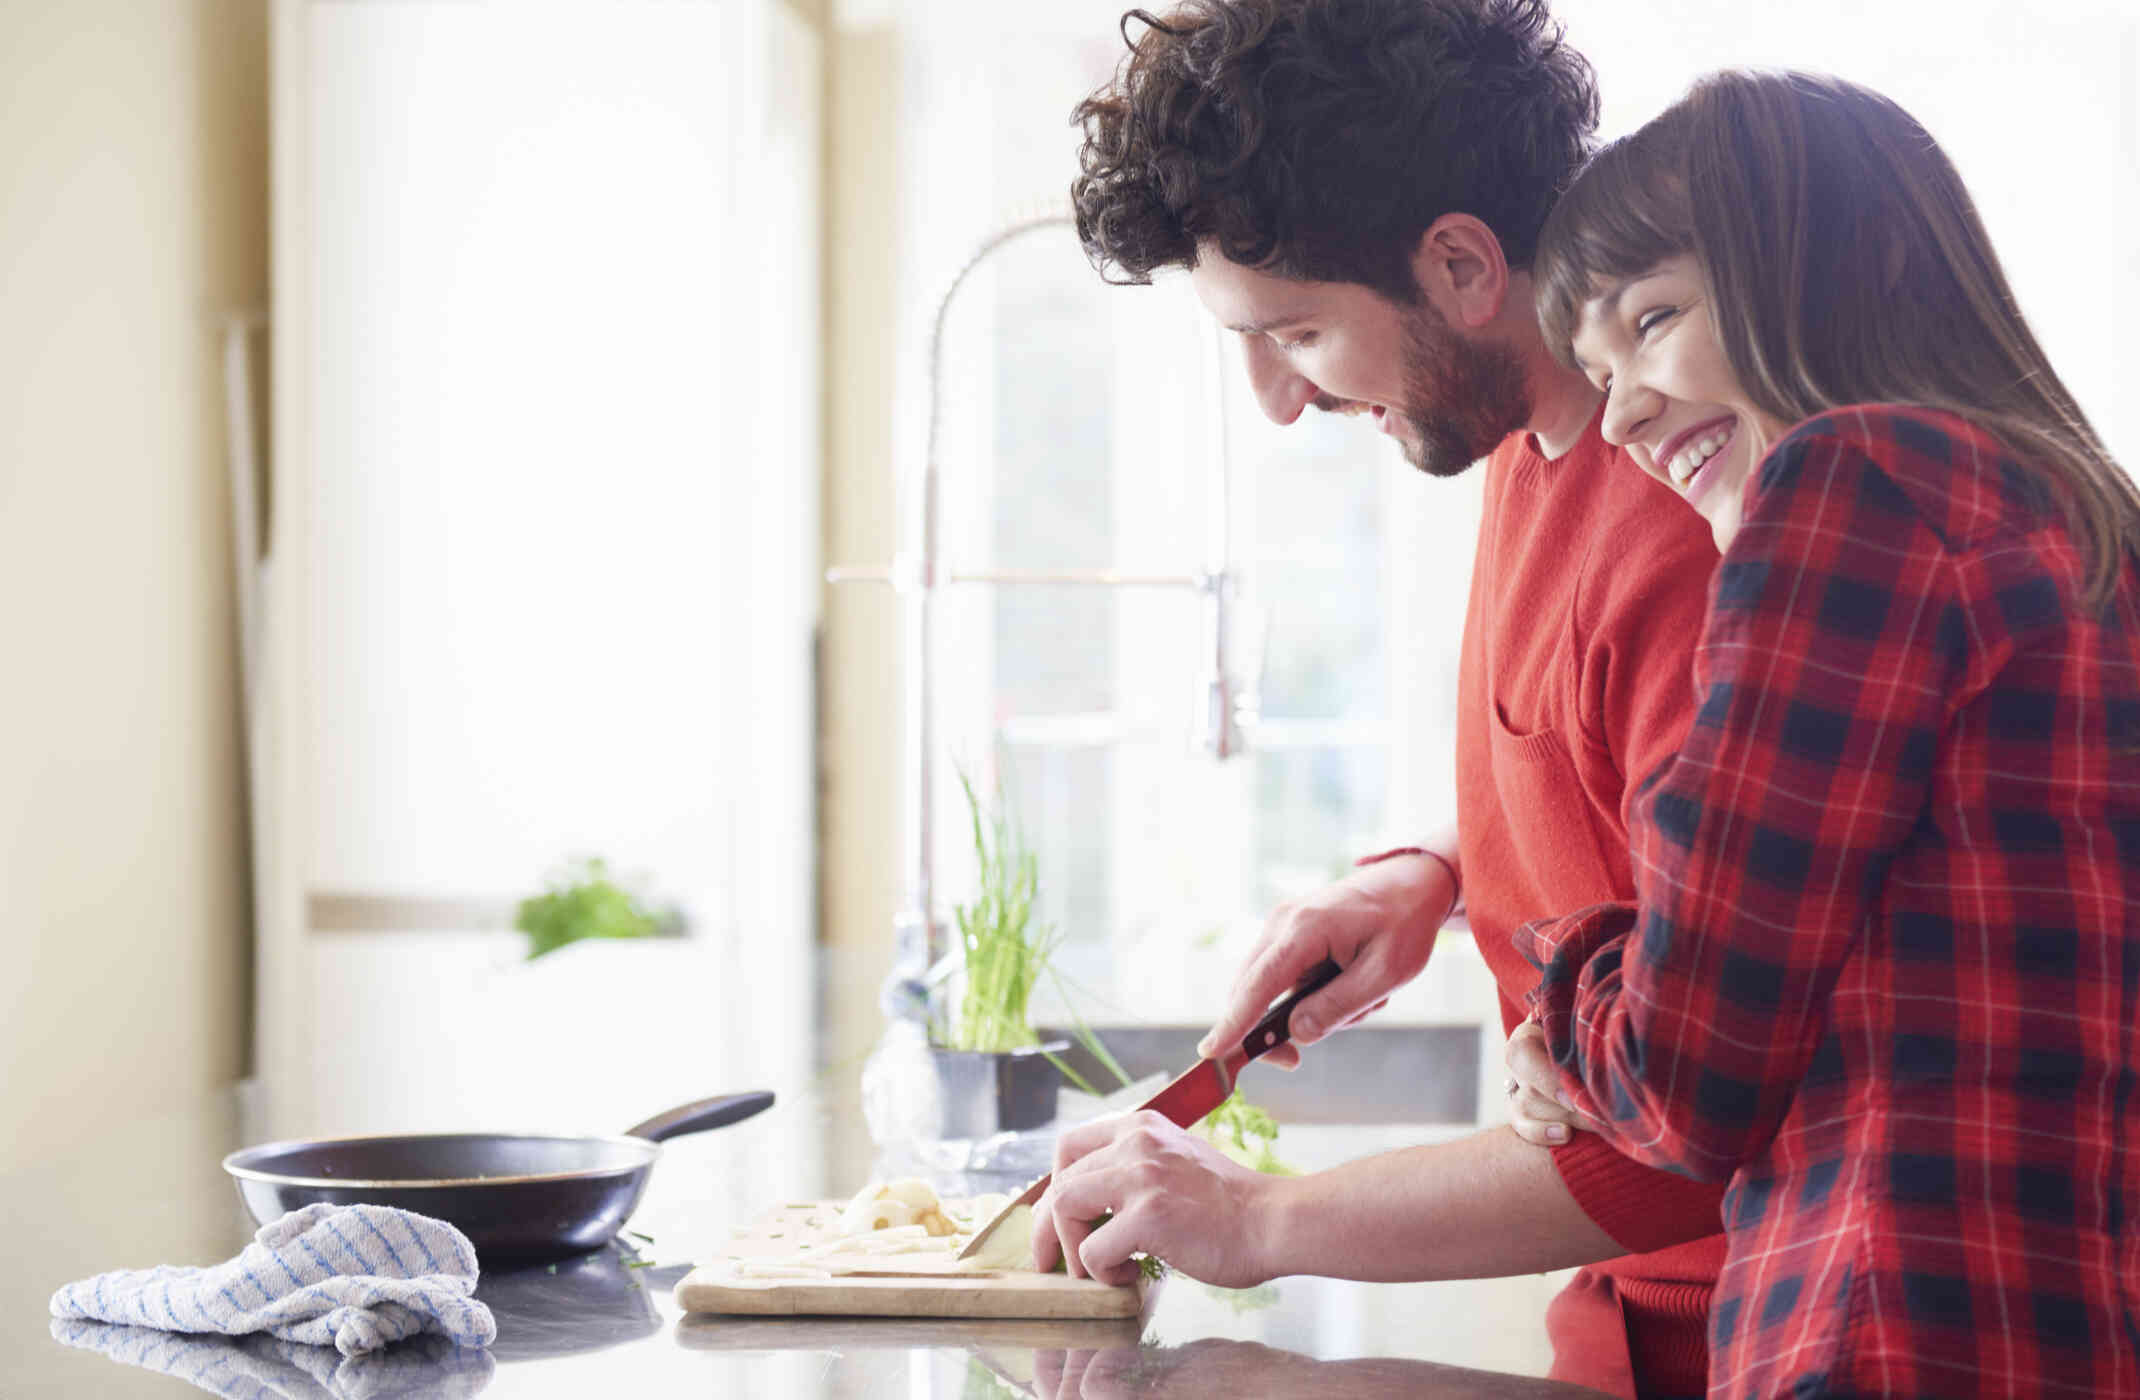 A man in a red shirt chops vegitables in the kitchen with a smile while his female partner gives him a hug.